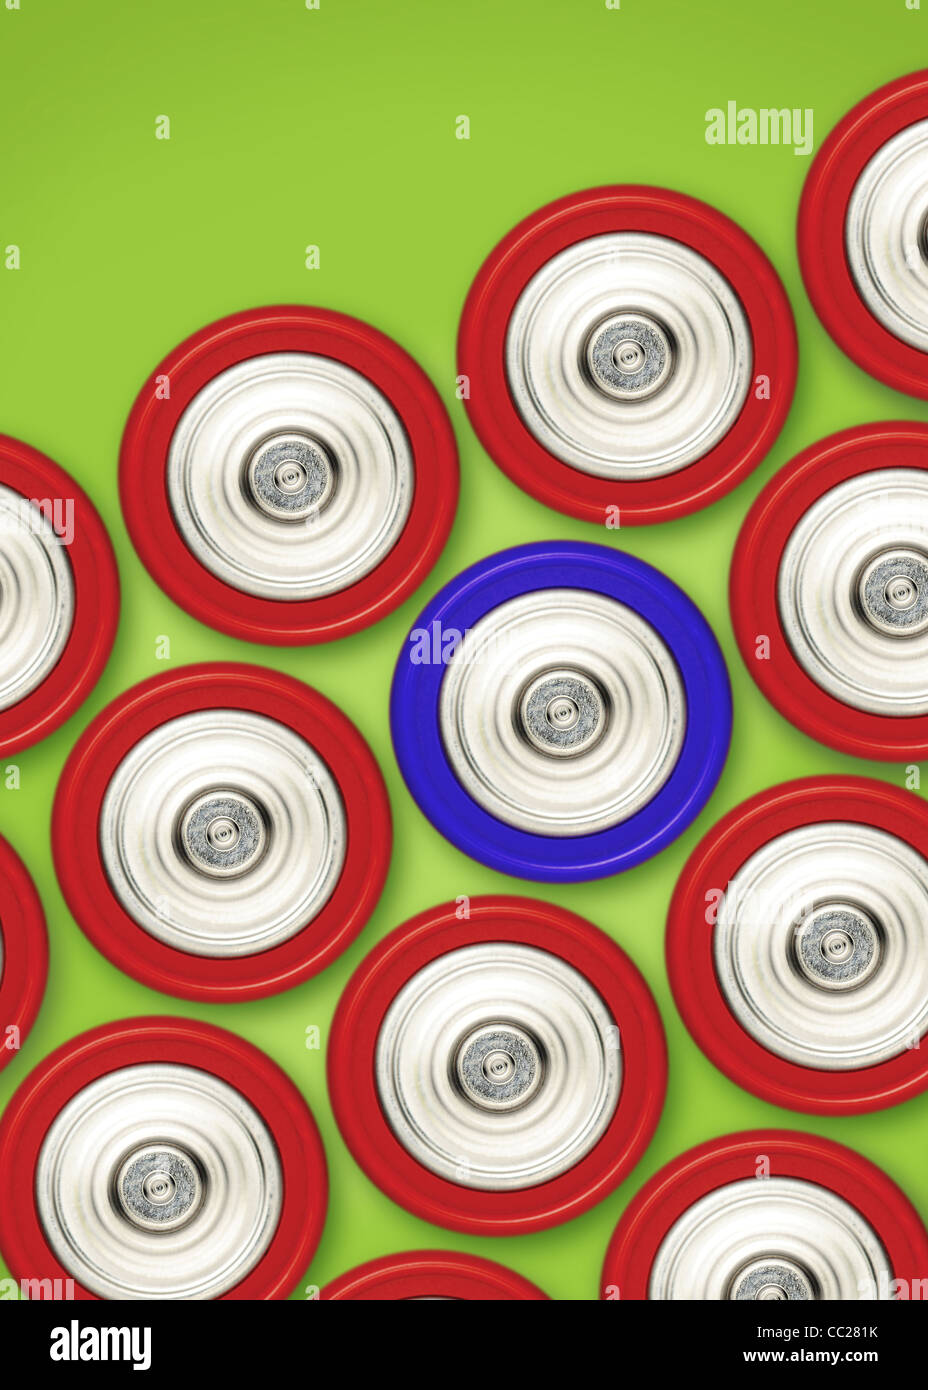 A blue battery amongst a group of red batteries Stock Photo